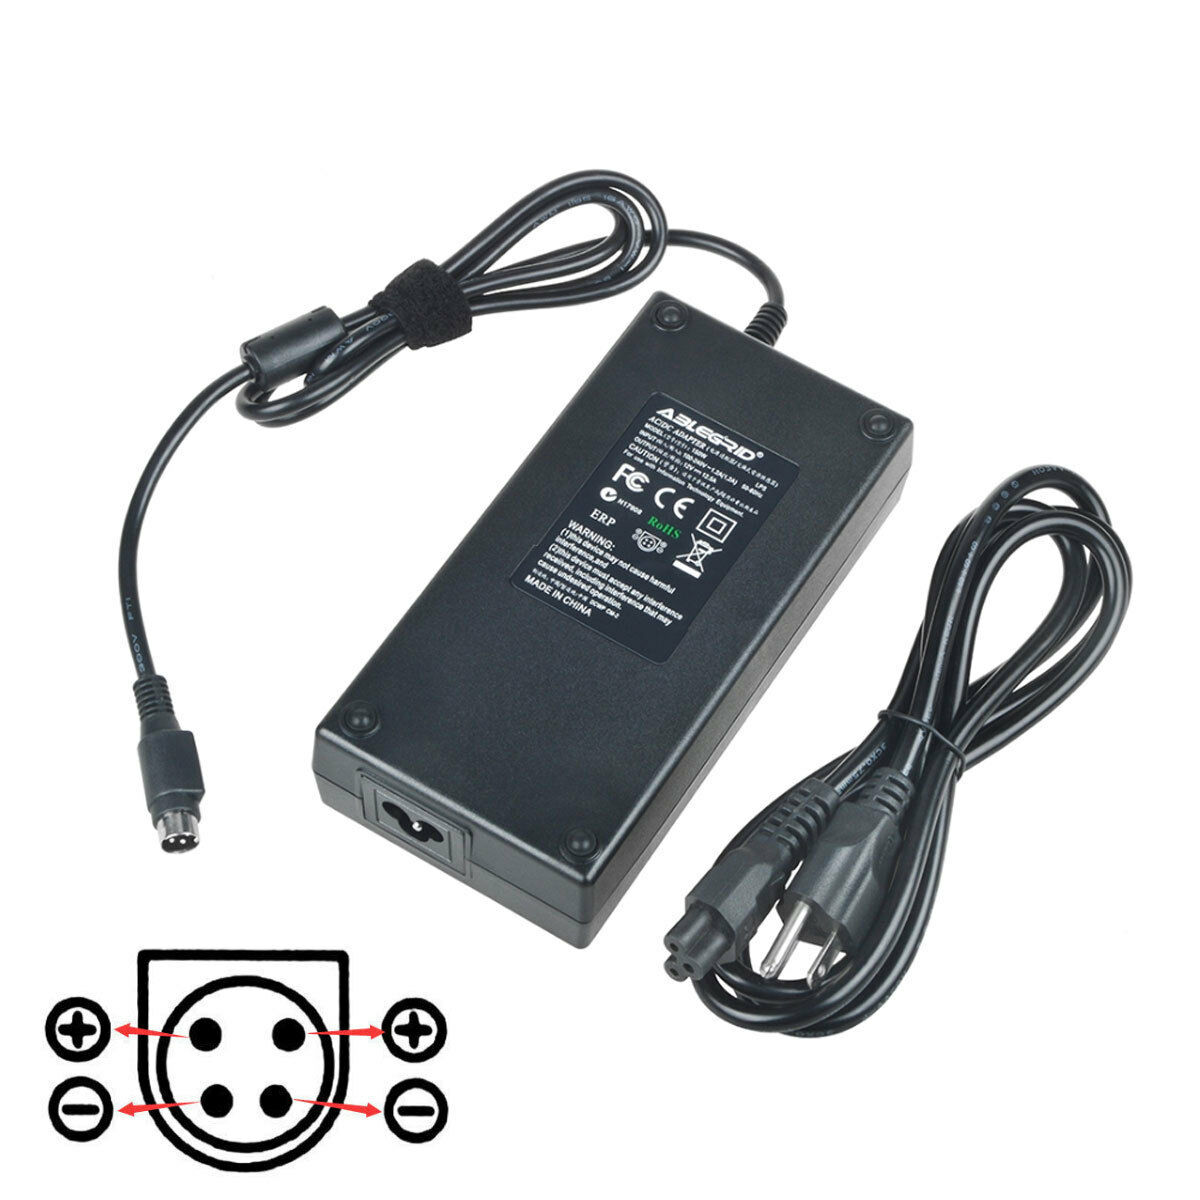 *Brand NEW* for Dell FSP150-AHAN1 LCD 9NA1350204 Power Cord Mains 4-Pin AC Adapter Charger